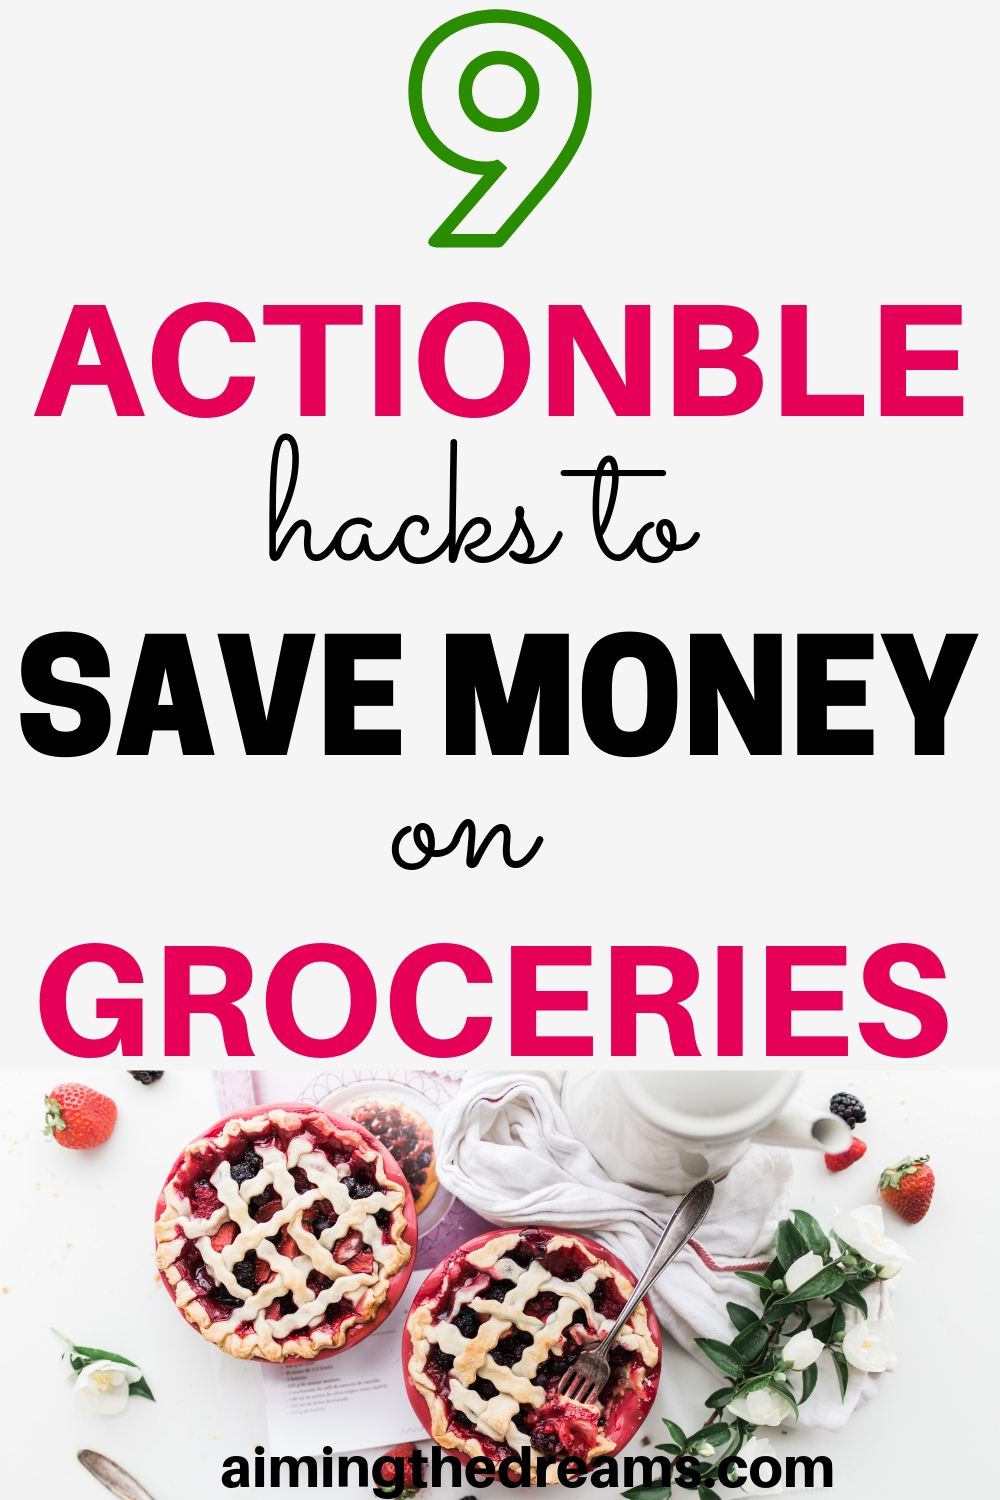 9 simple and actionable hacks to save money on groceries each month without sacrificing your needs.  